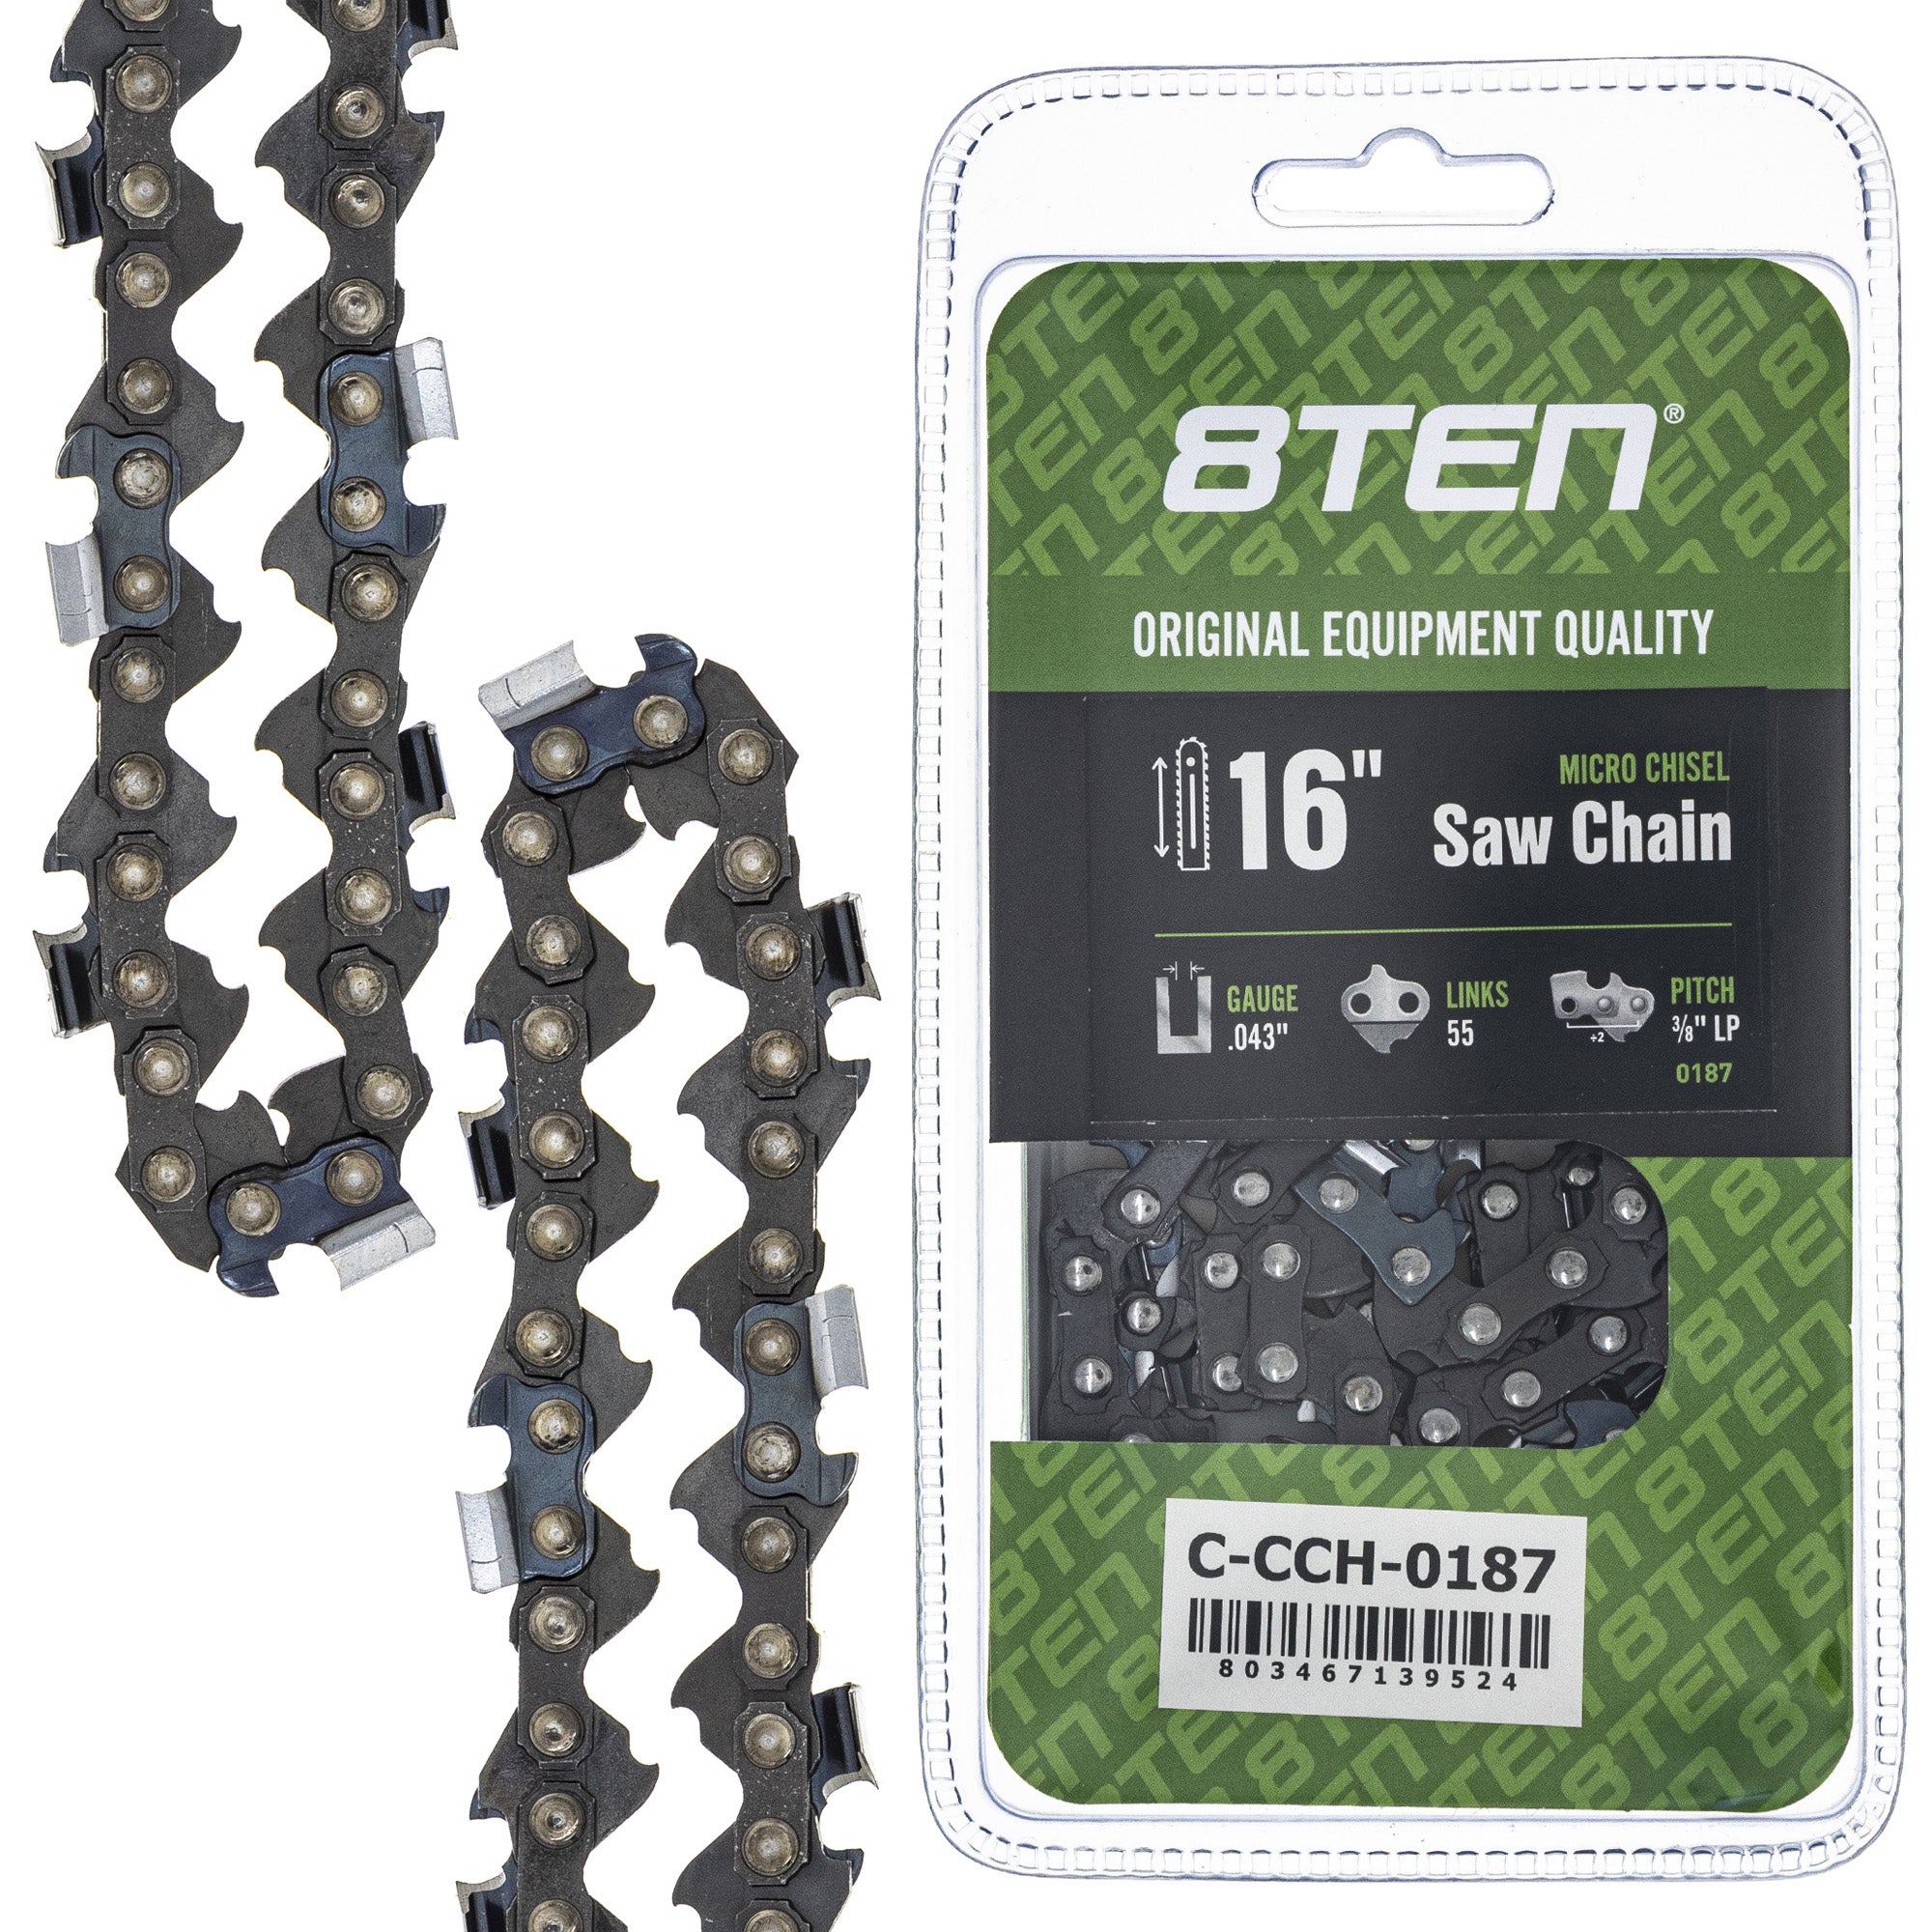 8TEN MK1010337 Guide Bar & Chain for MSE MS HT E